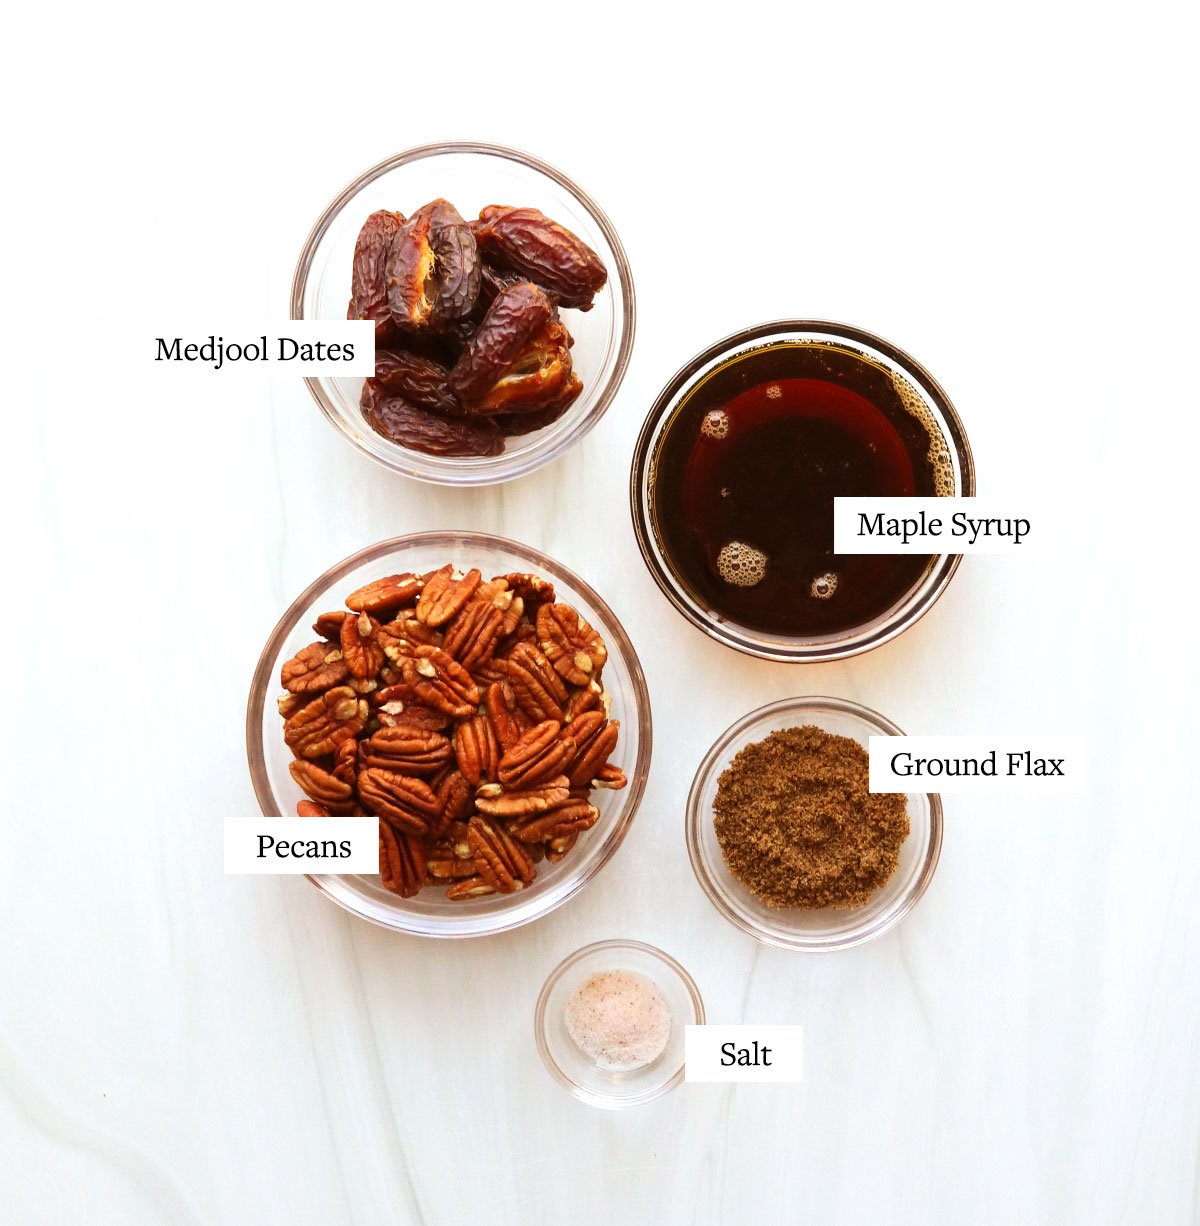 Vegan pecan pie ingredients labeled on a white surface.